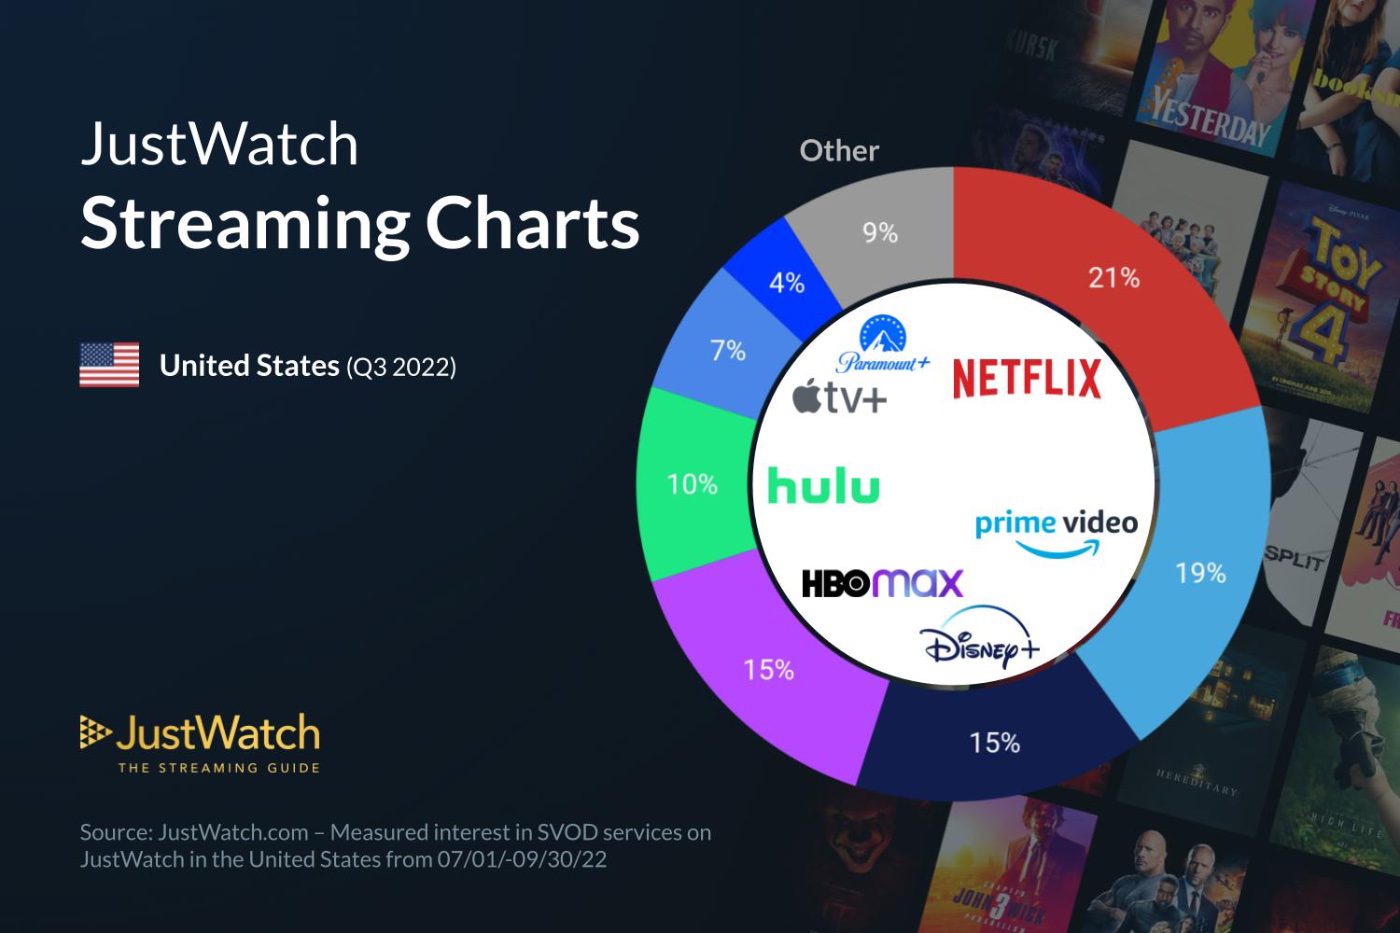 Apple TV Plus now owns 7% of the US streaming market